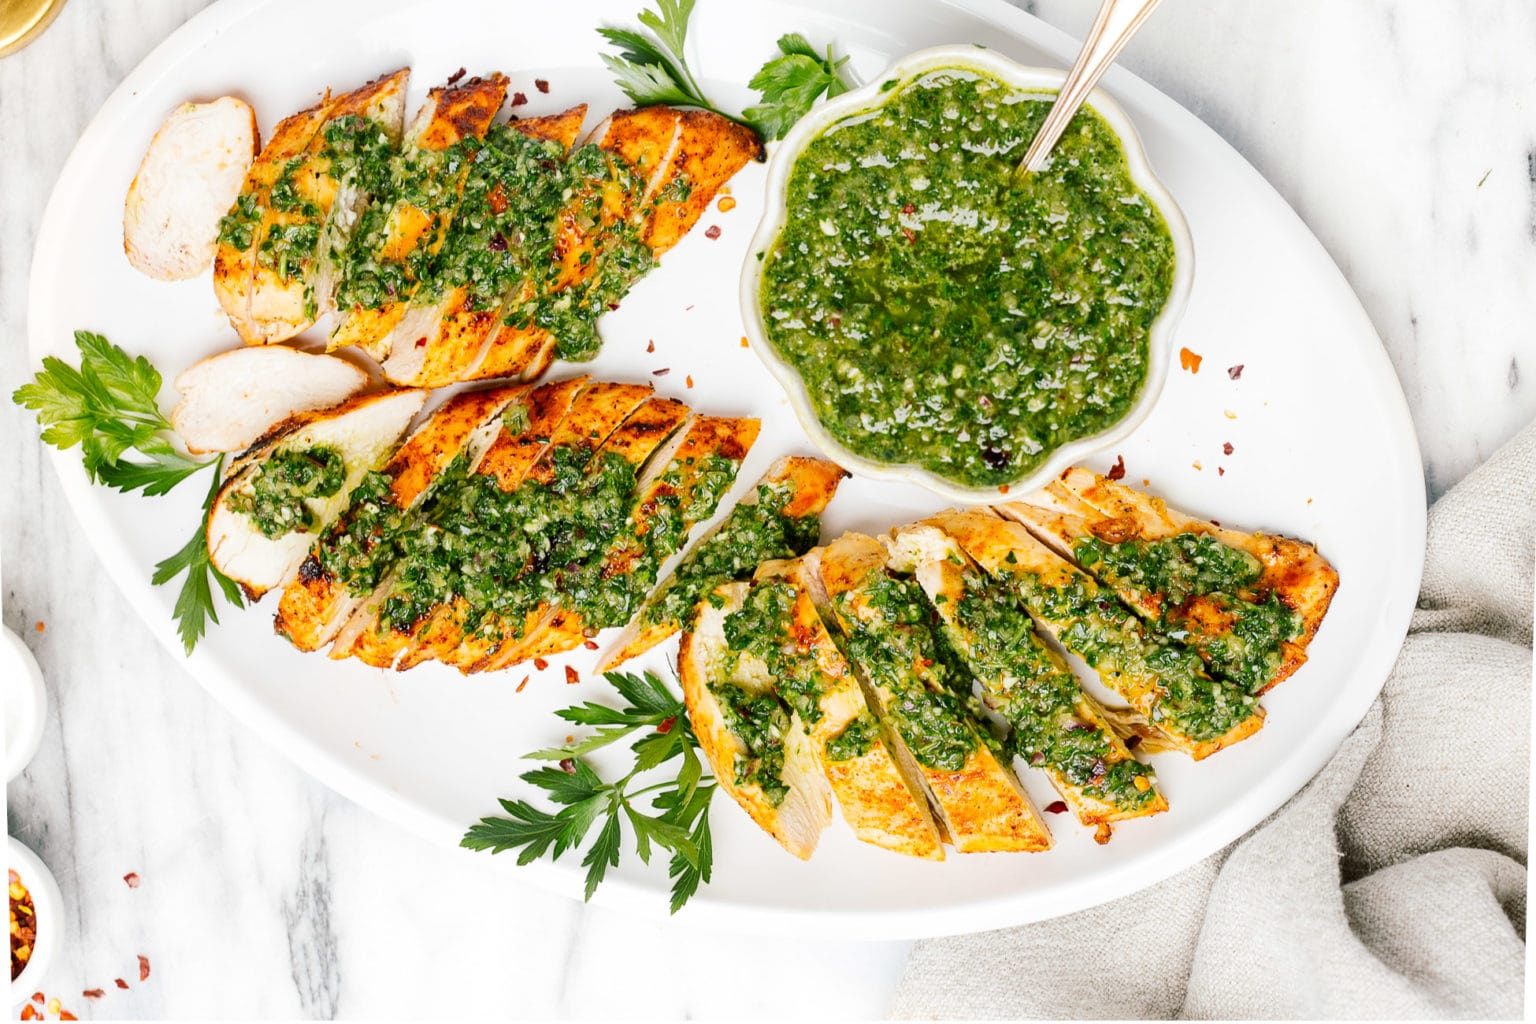 Grilled Chimichurri Chicken Breast Recipe Details